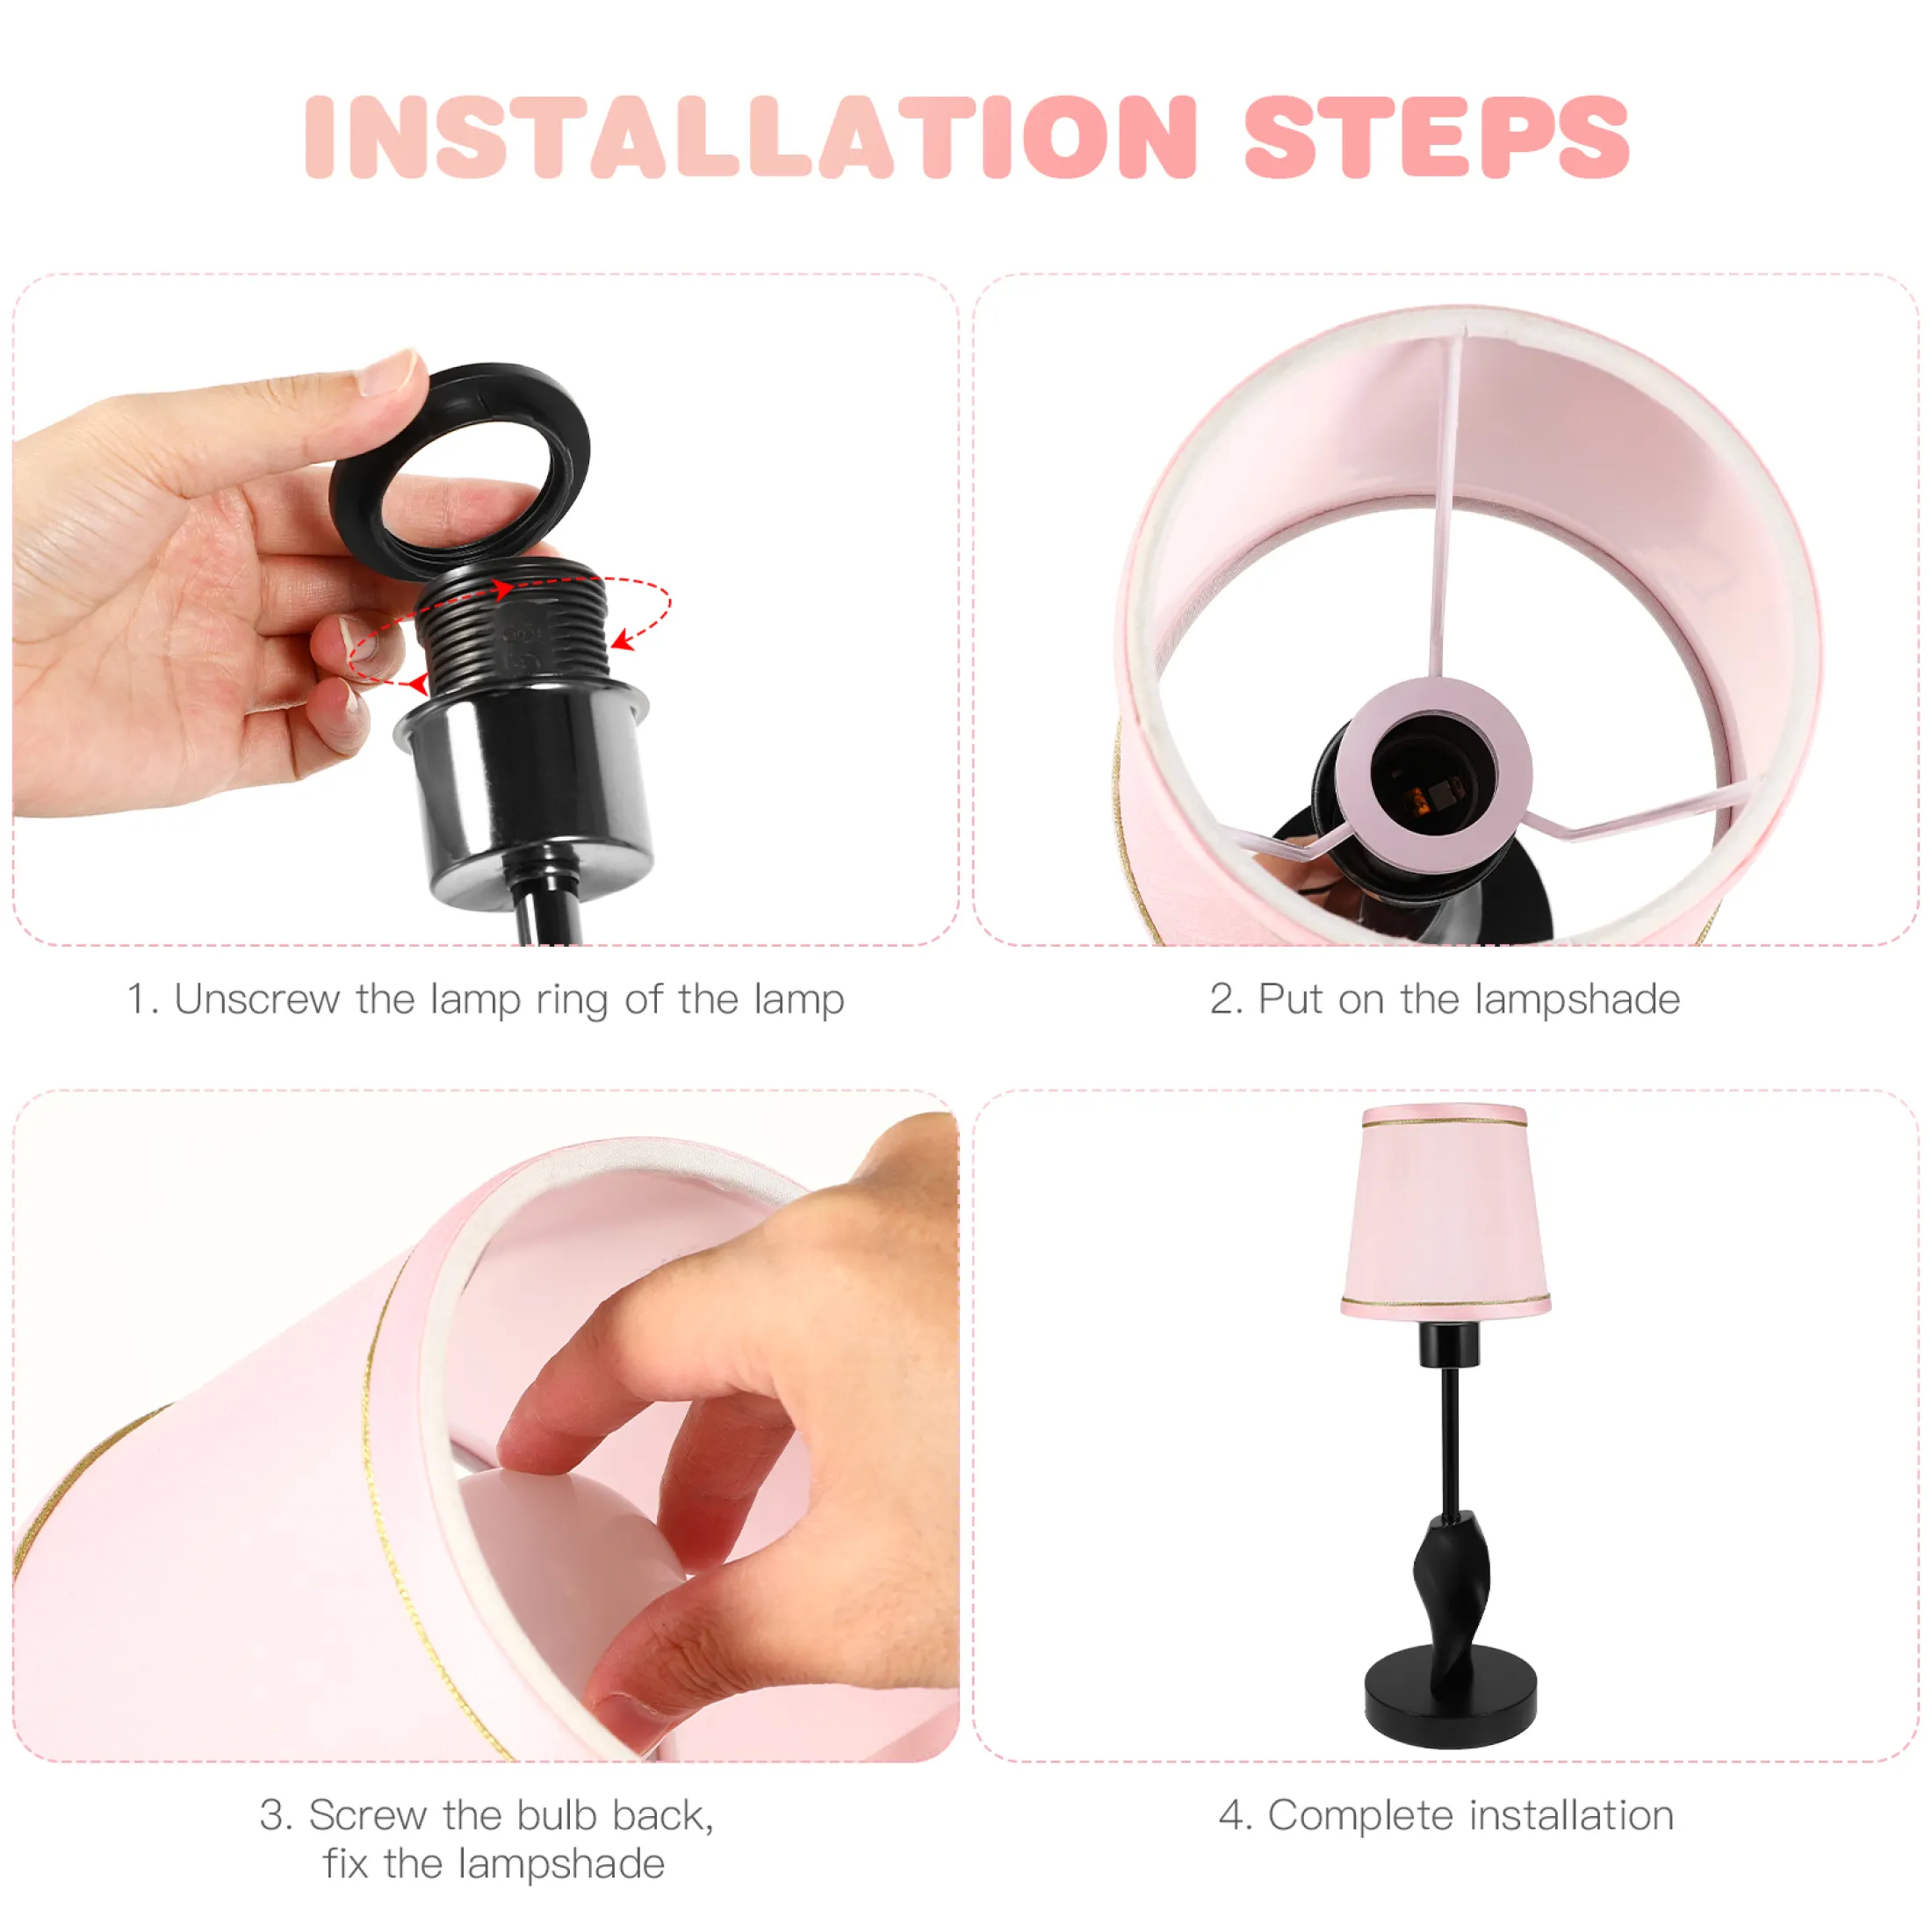 Homemaxs Mobestech Fashion Wall Lamp, How To Fix Lampshade Cover